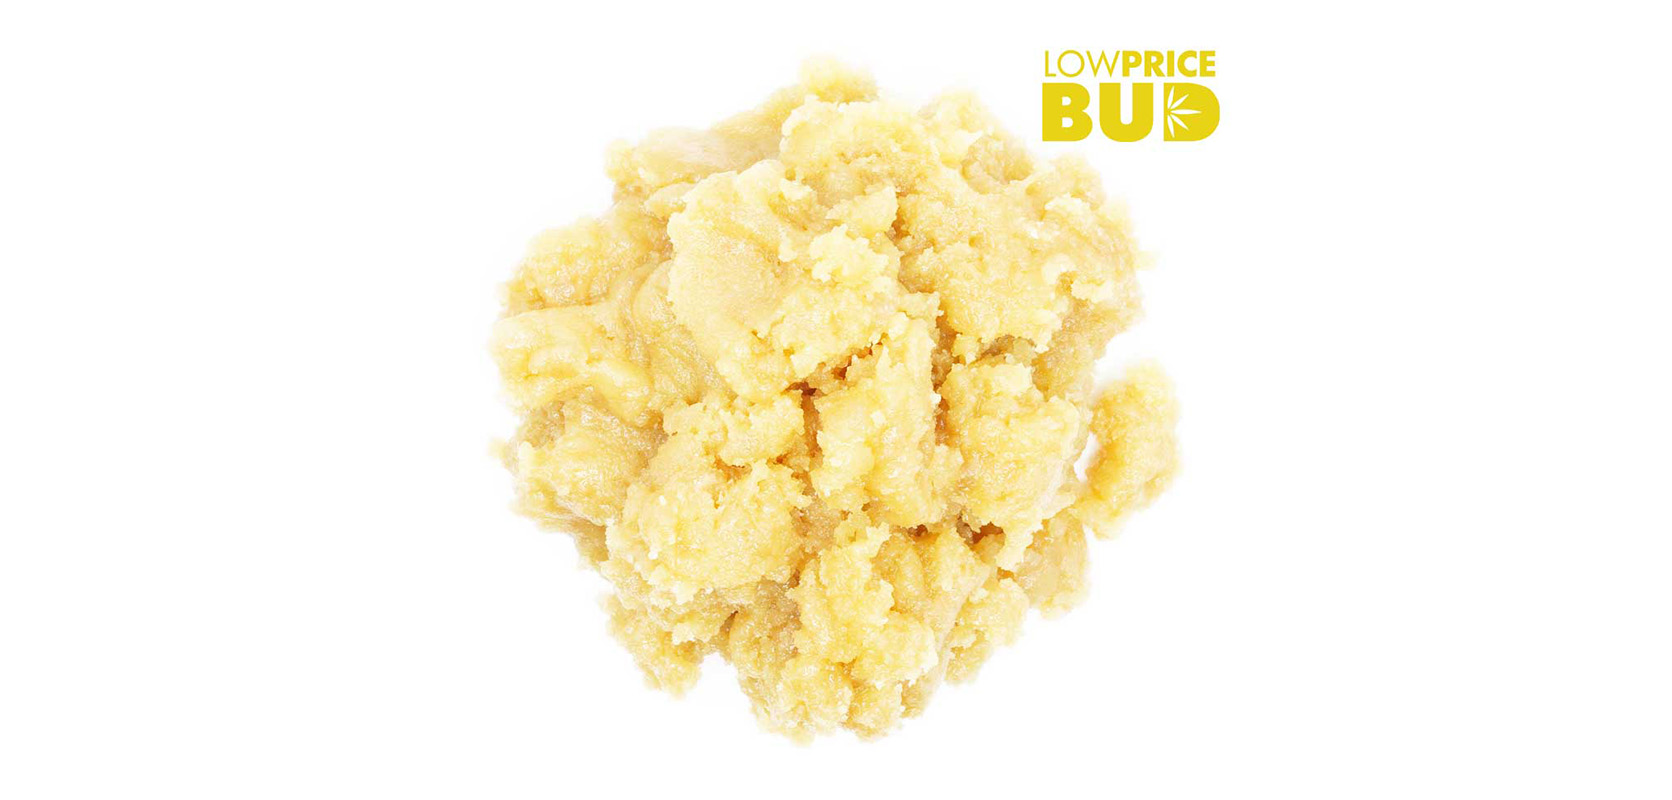 OG Kush Caviar From LowPriceBud. Buy weed online in canada from mail order marijuana online dispensary in BC.